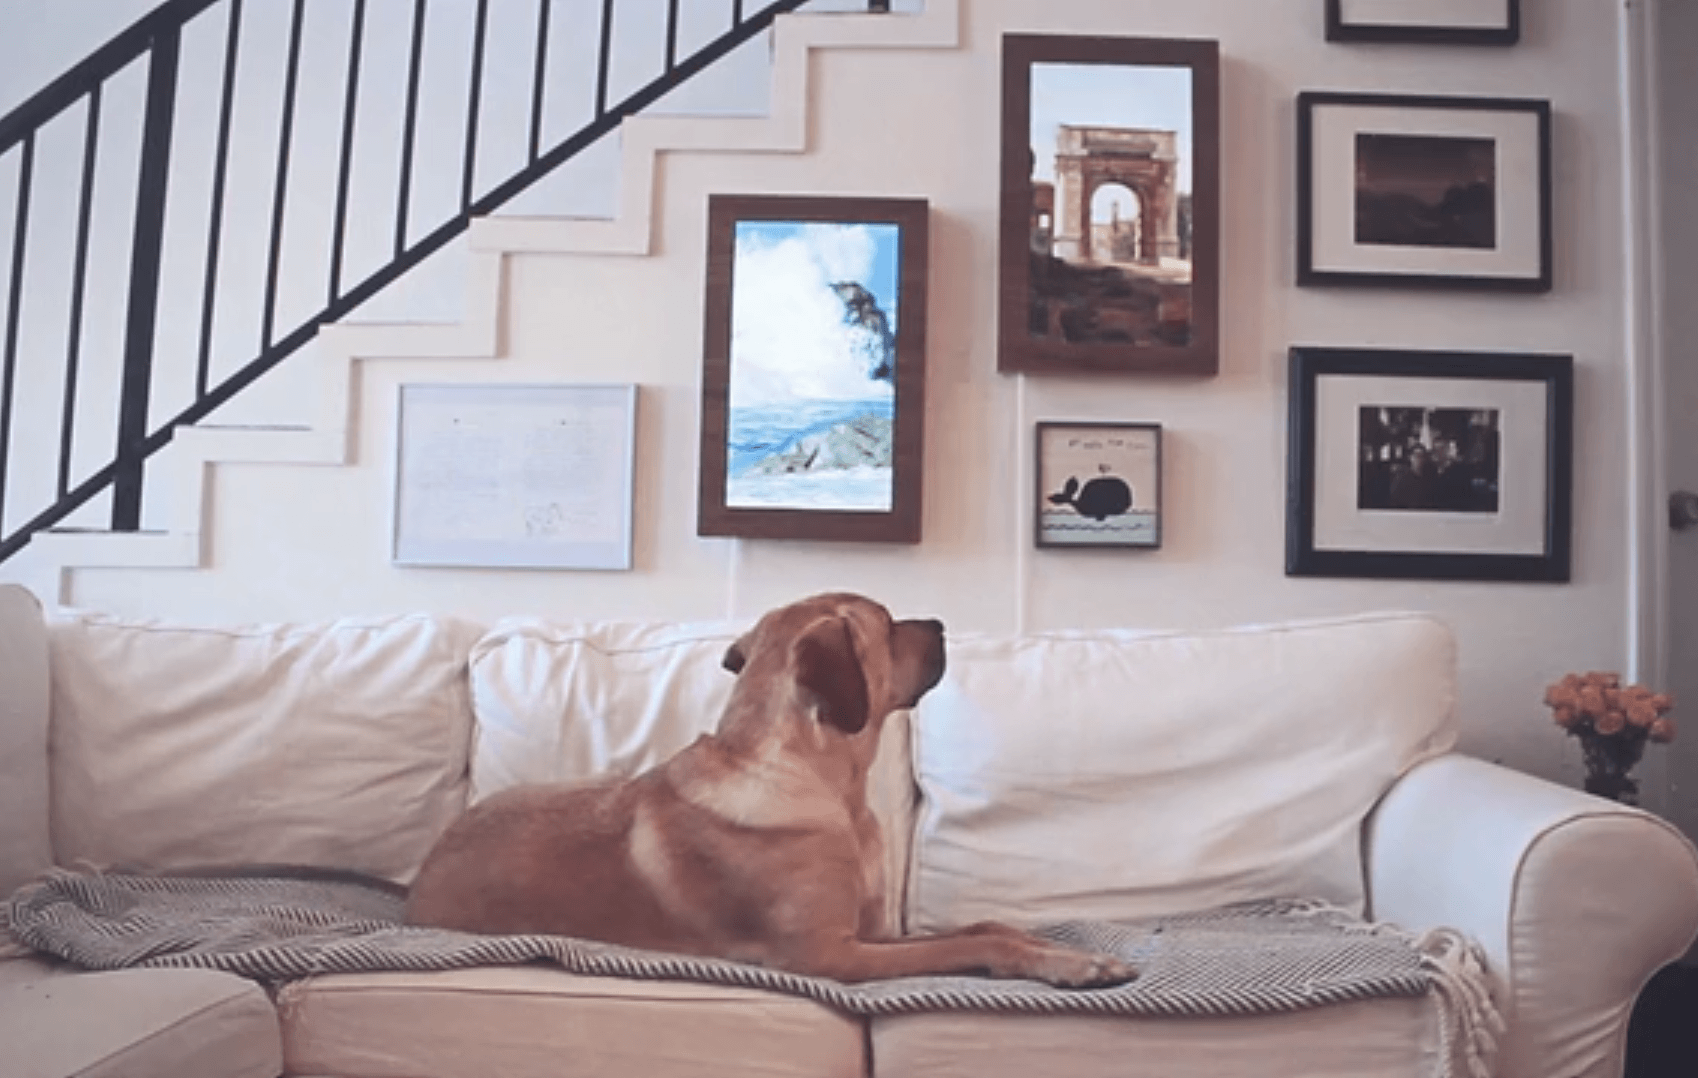 4 Words That Will Make You Want This Gadget: GIF On Your Wall